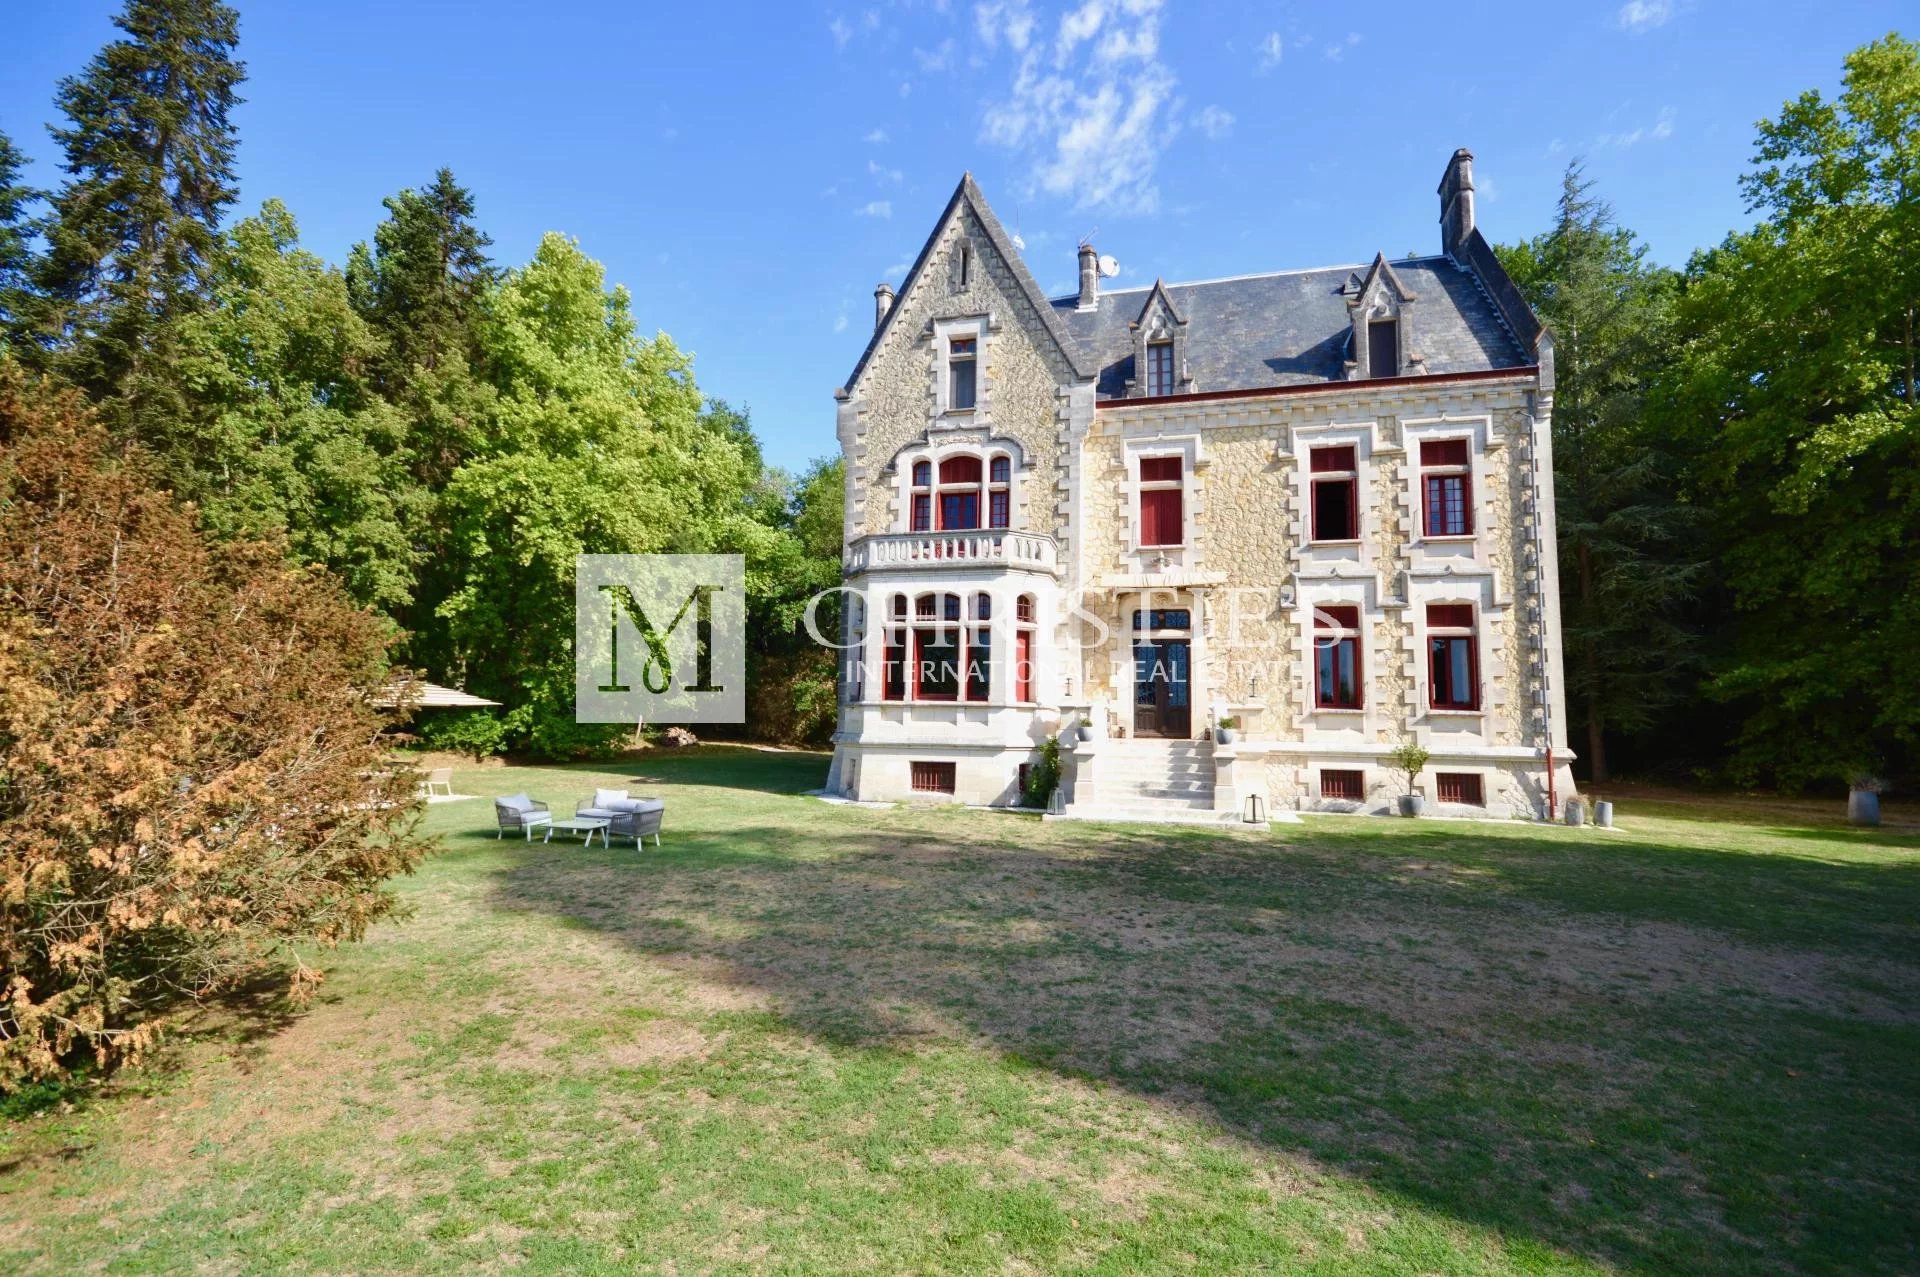 Enchanting Chateau with 9 hectares of land near Bergerac